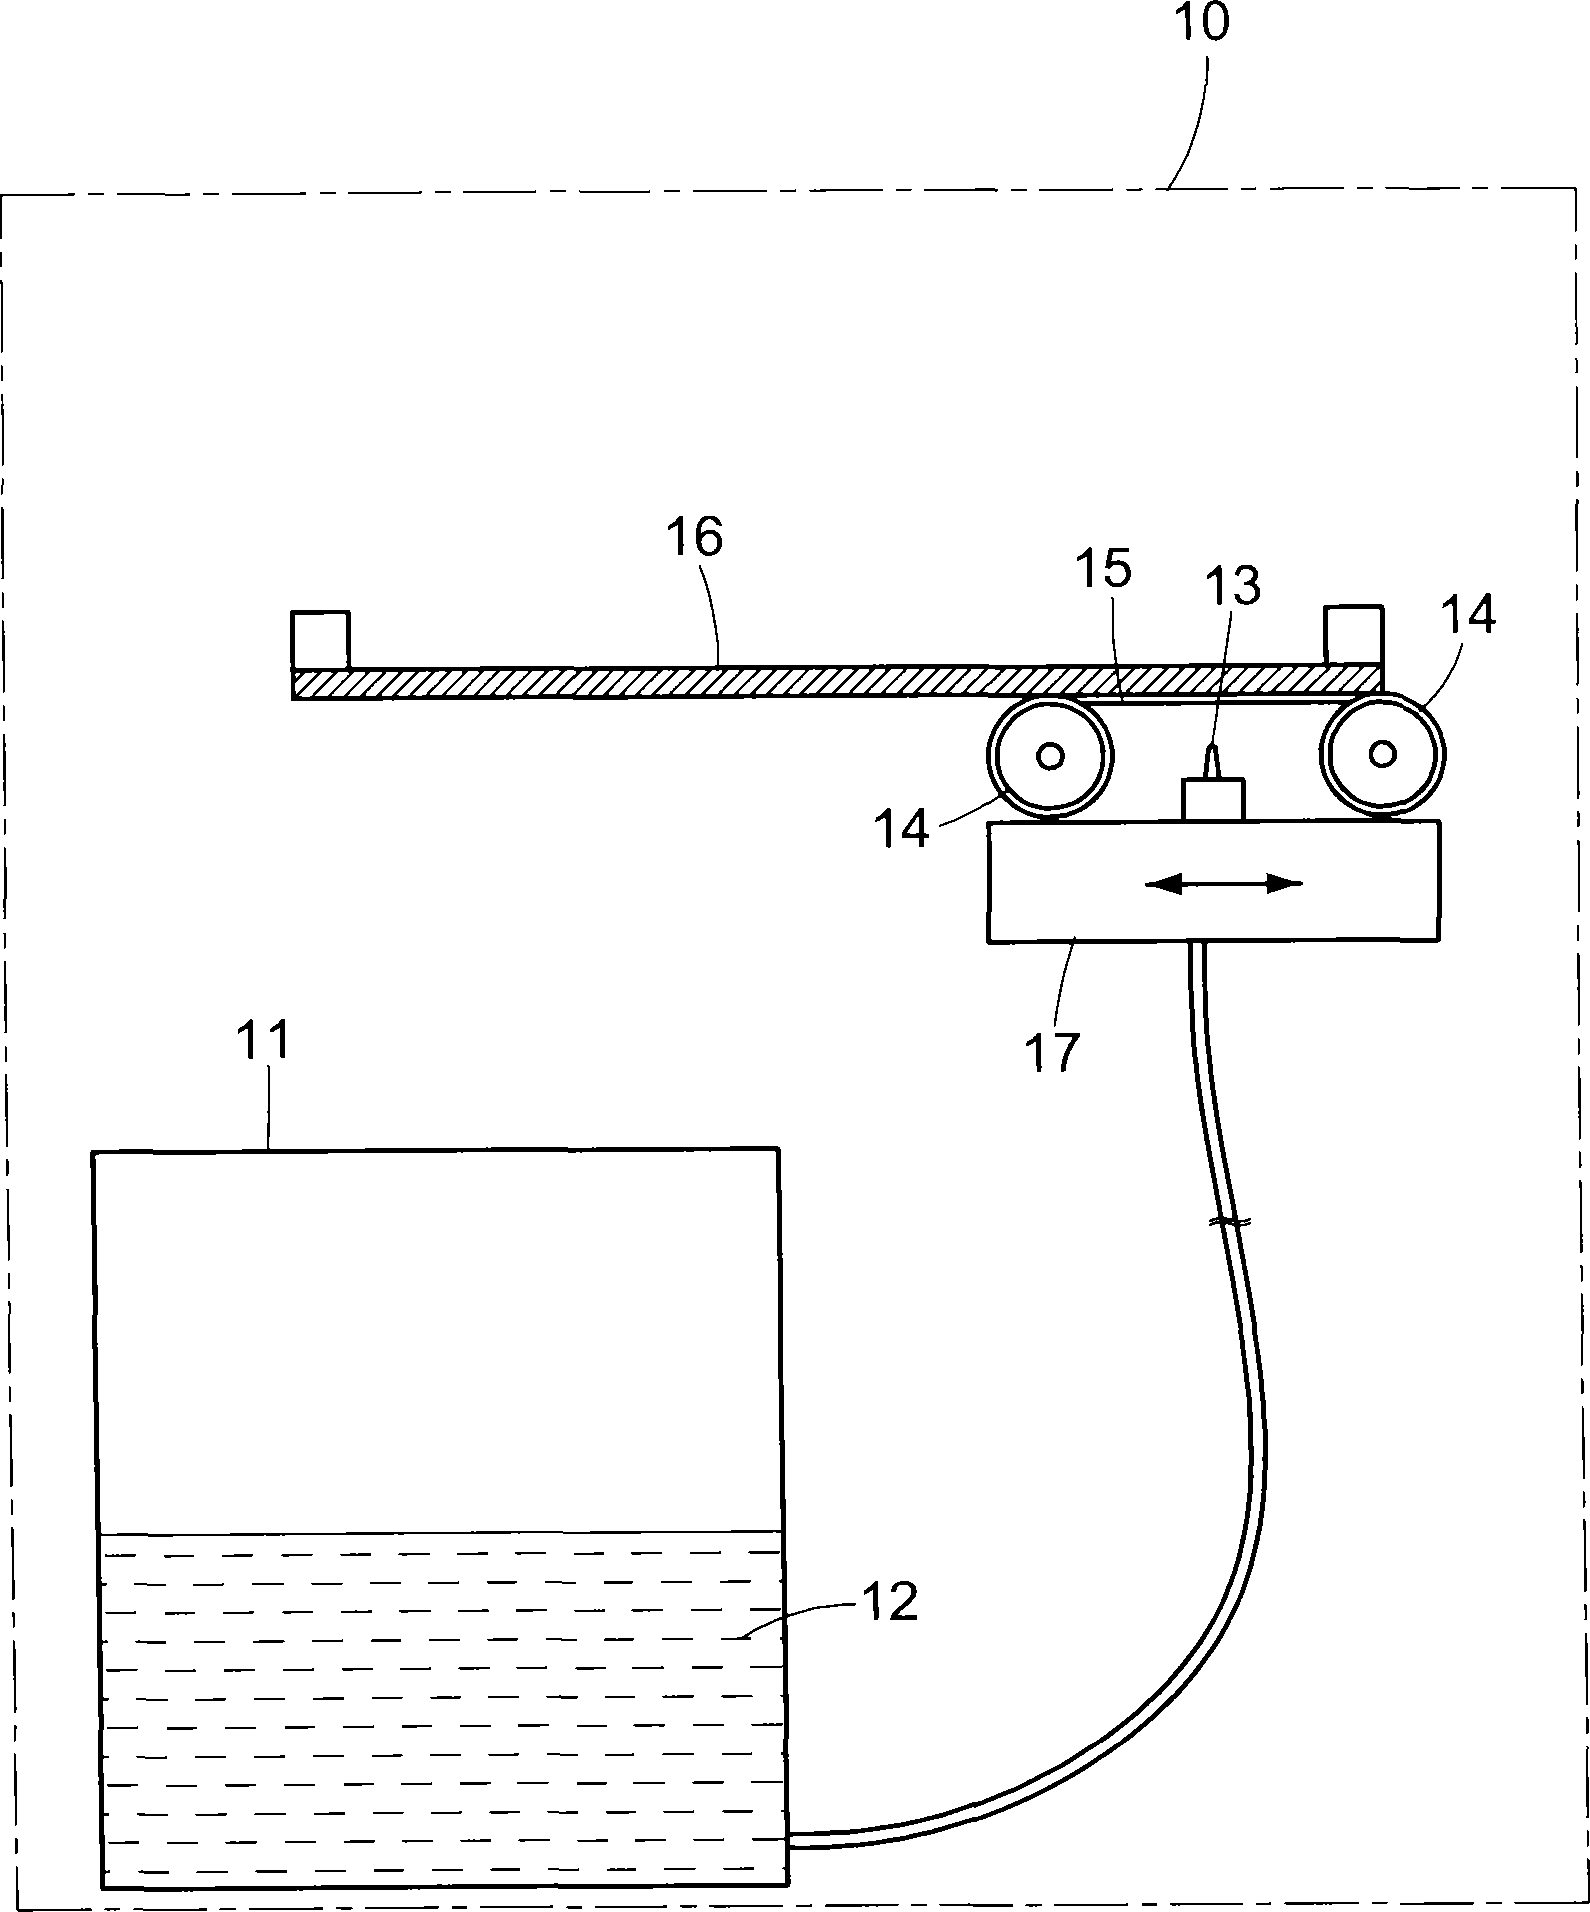 Water-based solution automatic cleaning device applied to printing device with tin cream adhered to surface